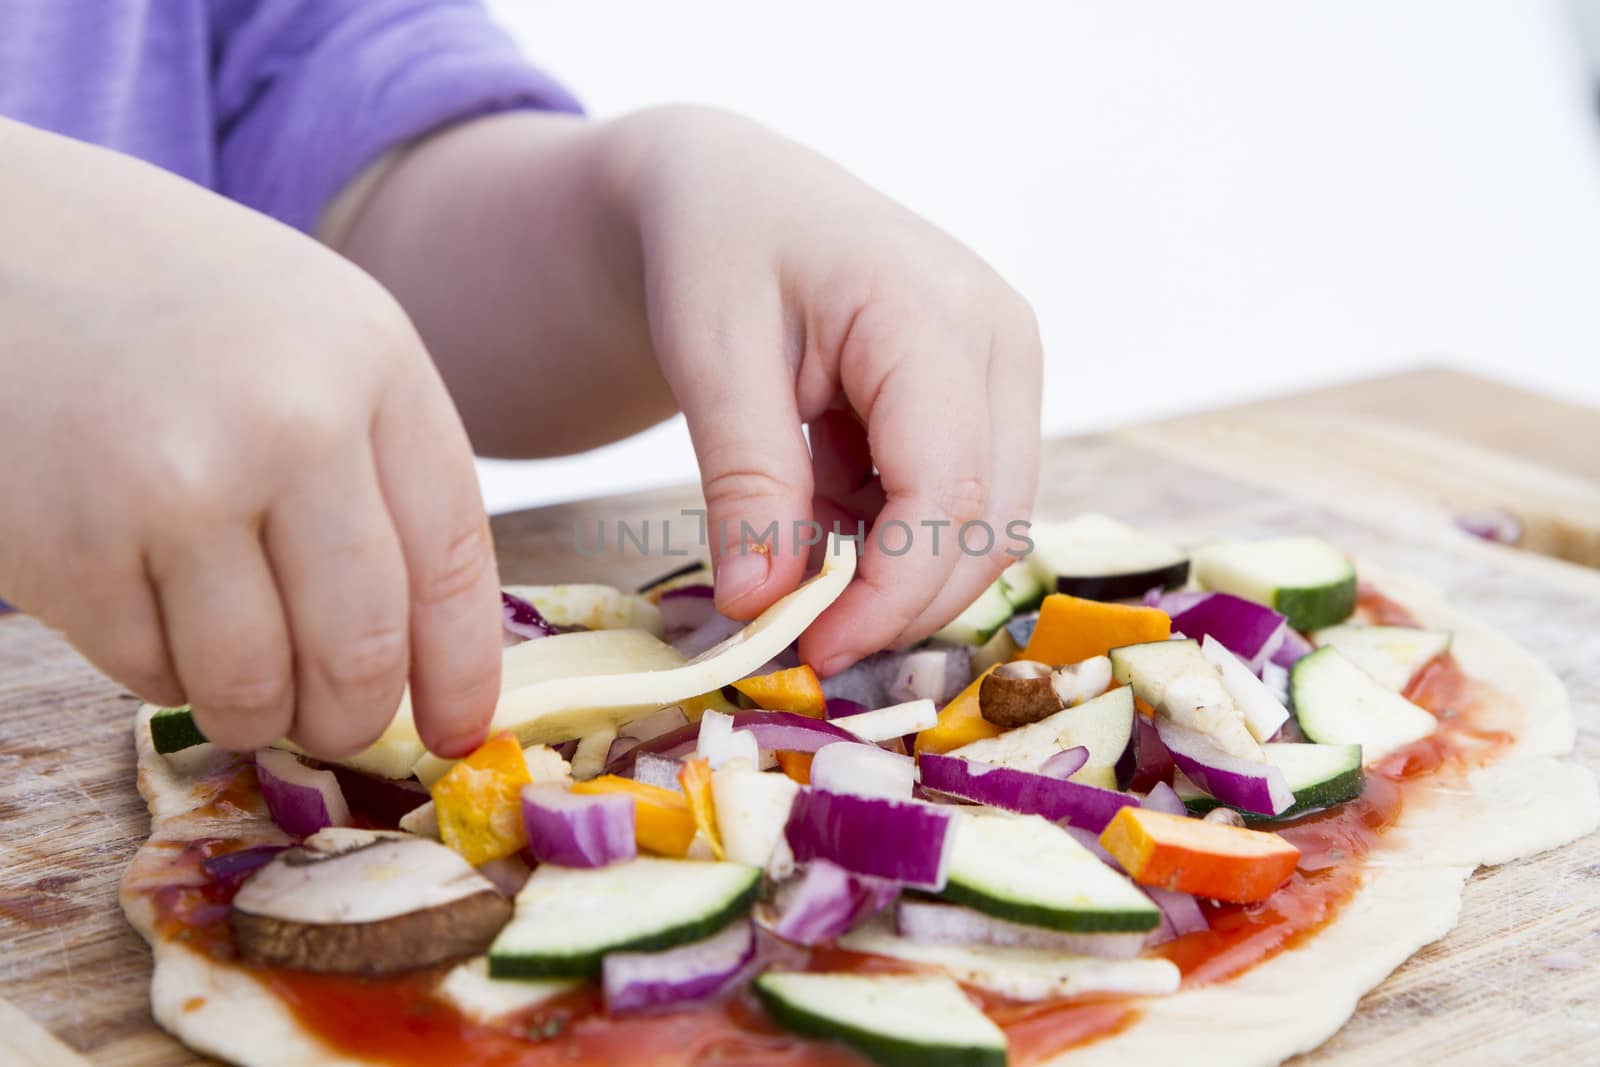 small hands preparing pizza by gewoldi